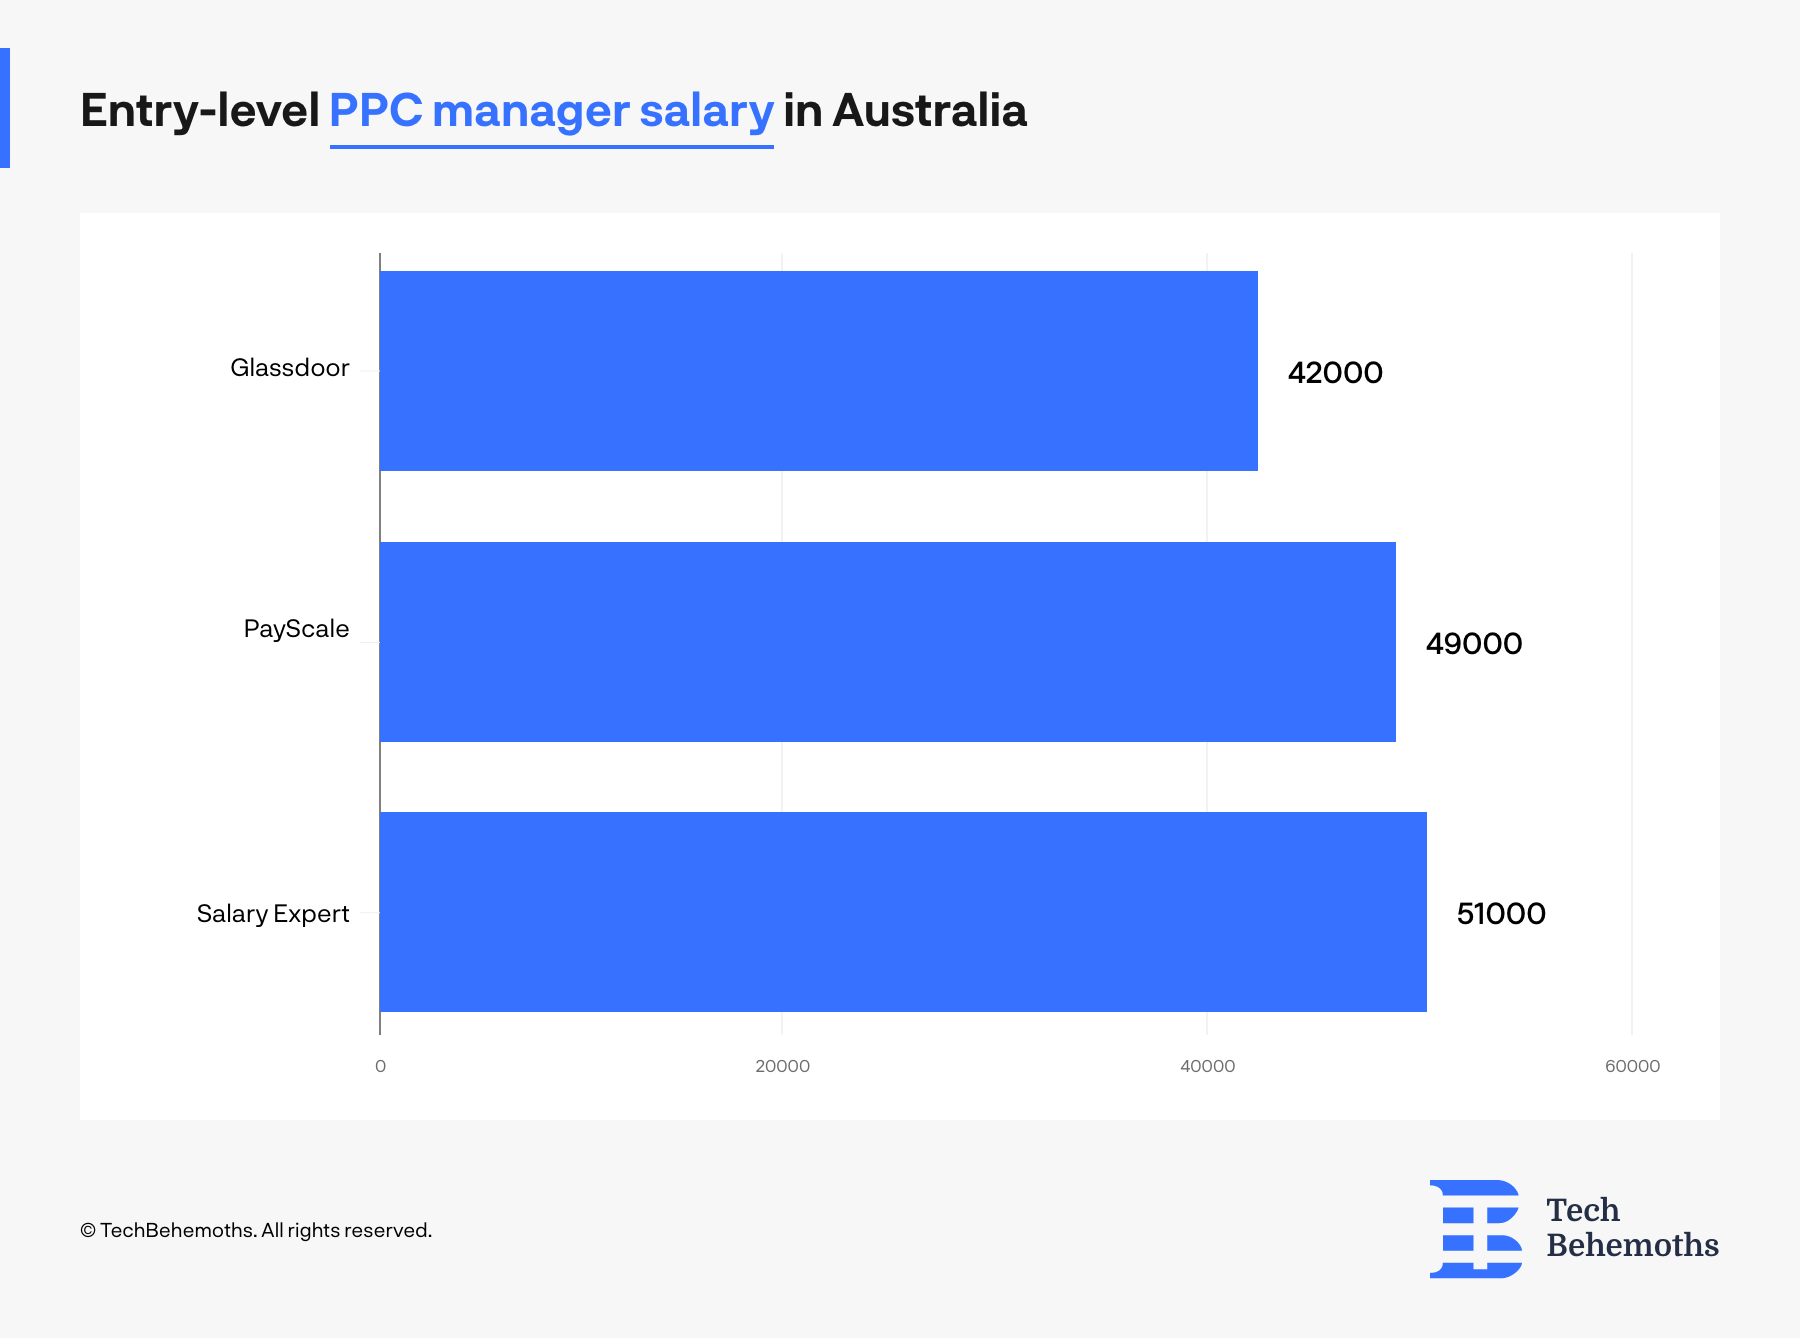 entry level salaries for ppc managers in australia according to multiple sources